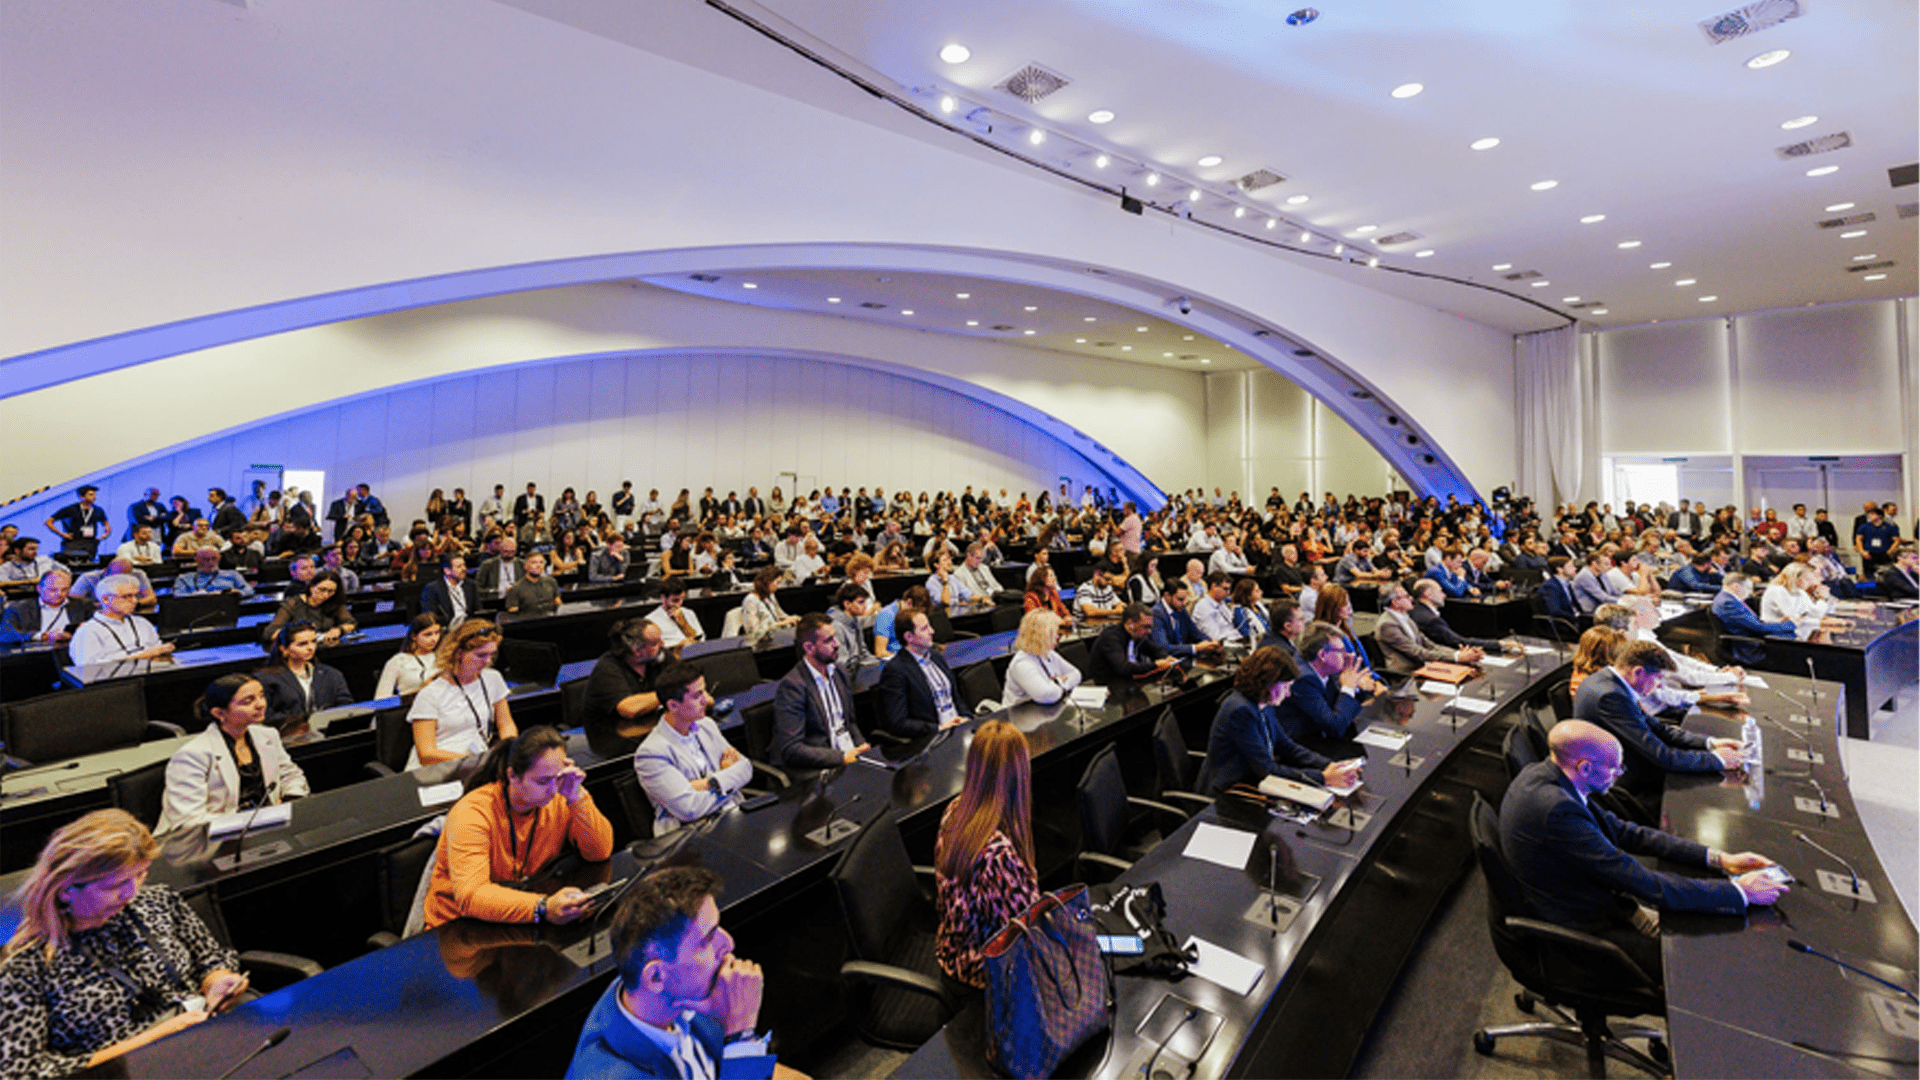 Valencia Digital Summit brings together 12,000 professionals from 91 countries for its sixth edition (Sponsored) | EU-Startups